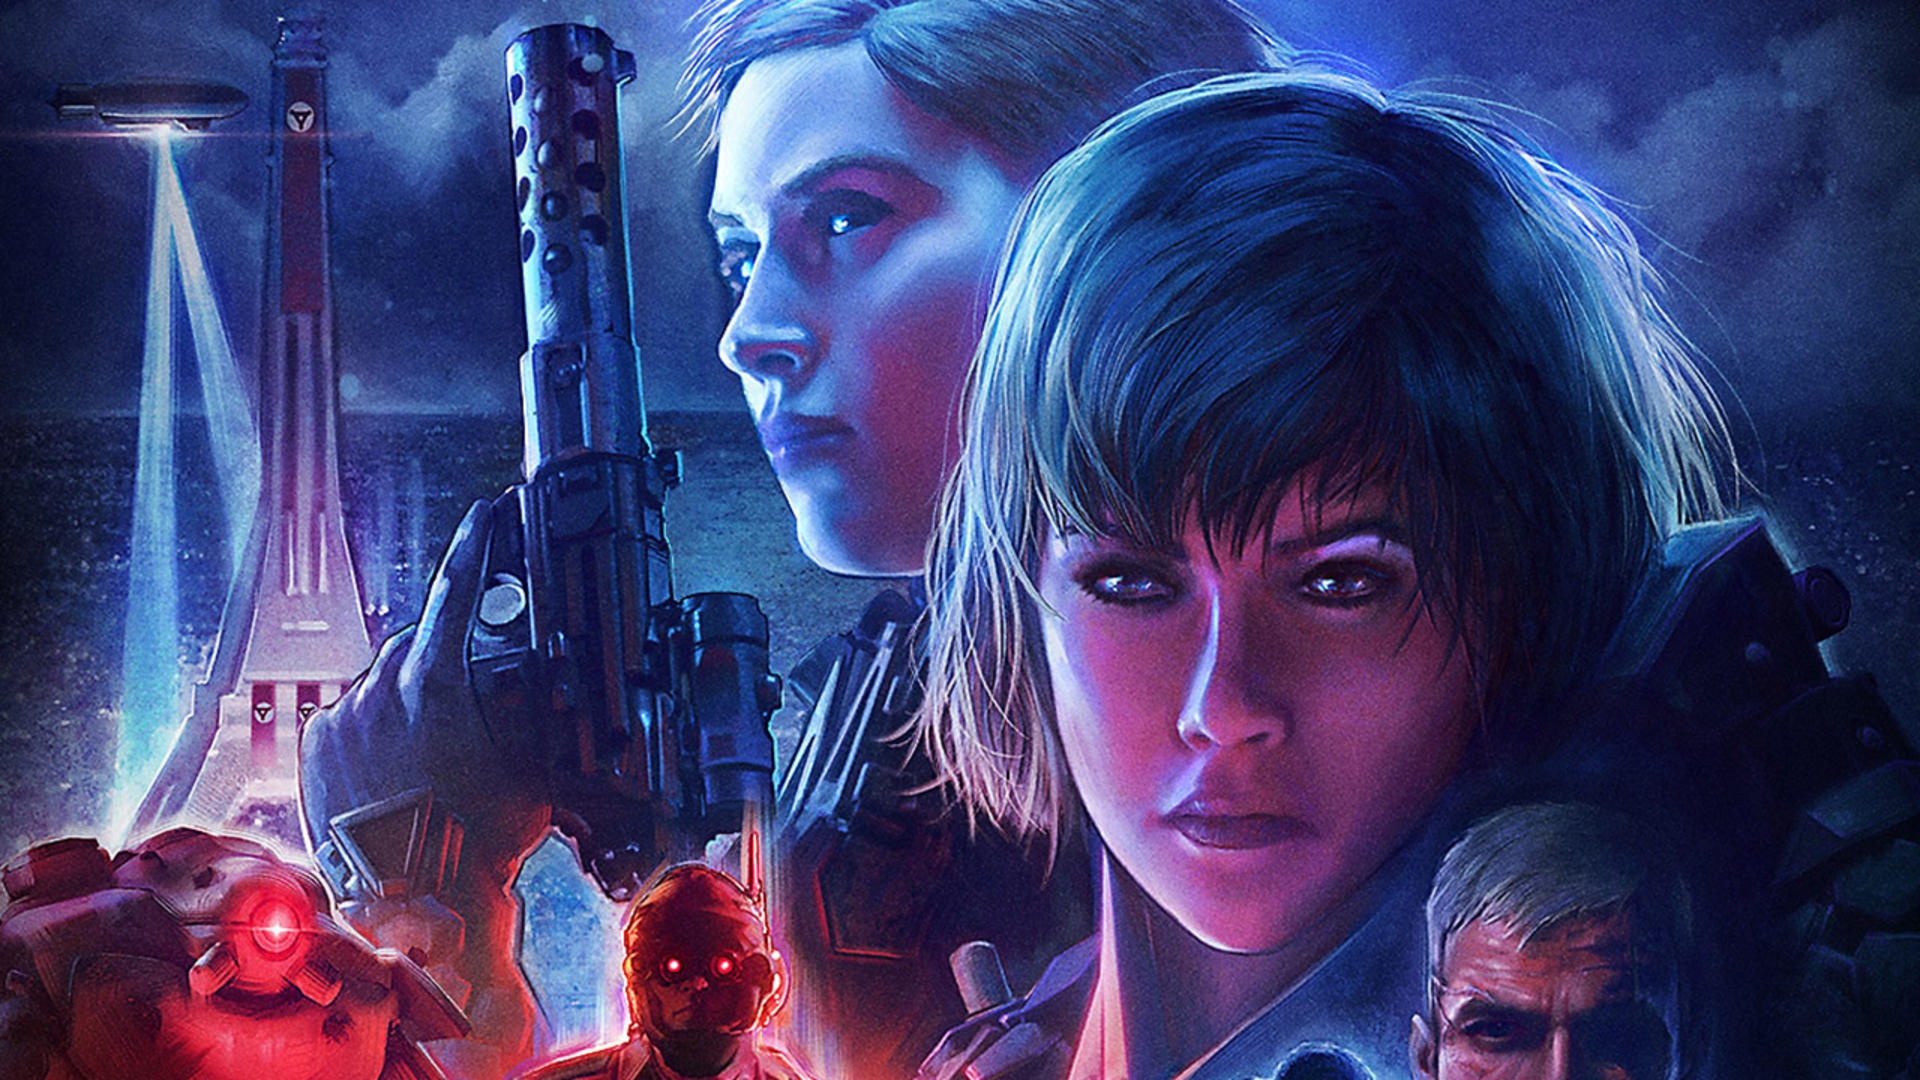 Wolfenstein: Youngblood - PCGamingWiki PCGW - bugs, fixes, crashes, mods,  guides and improvements for every PC game